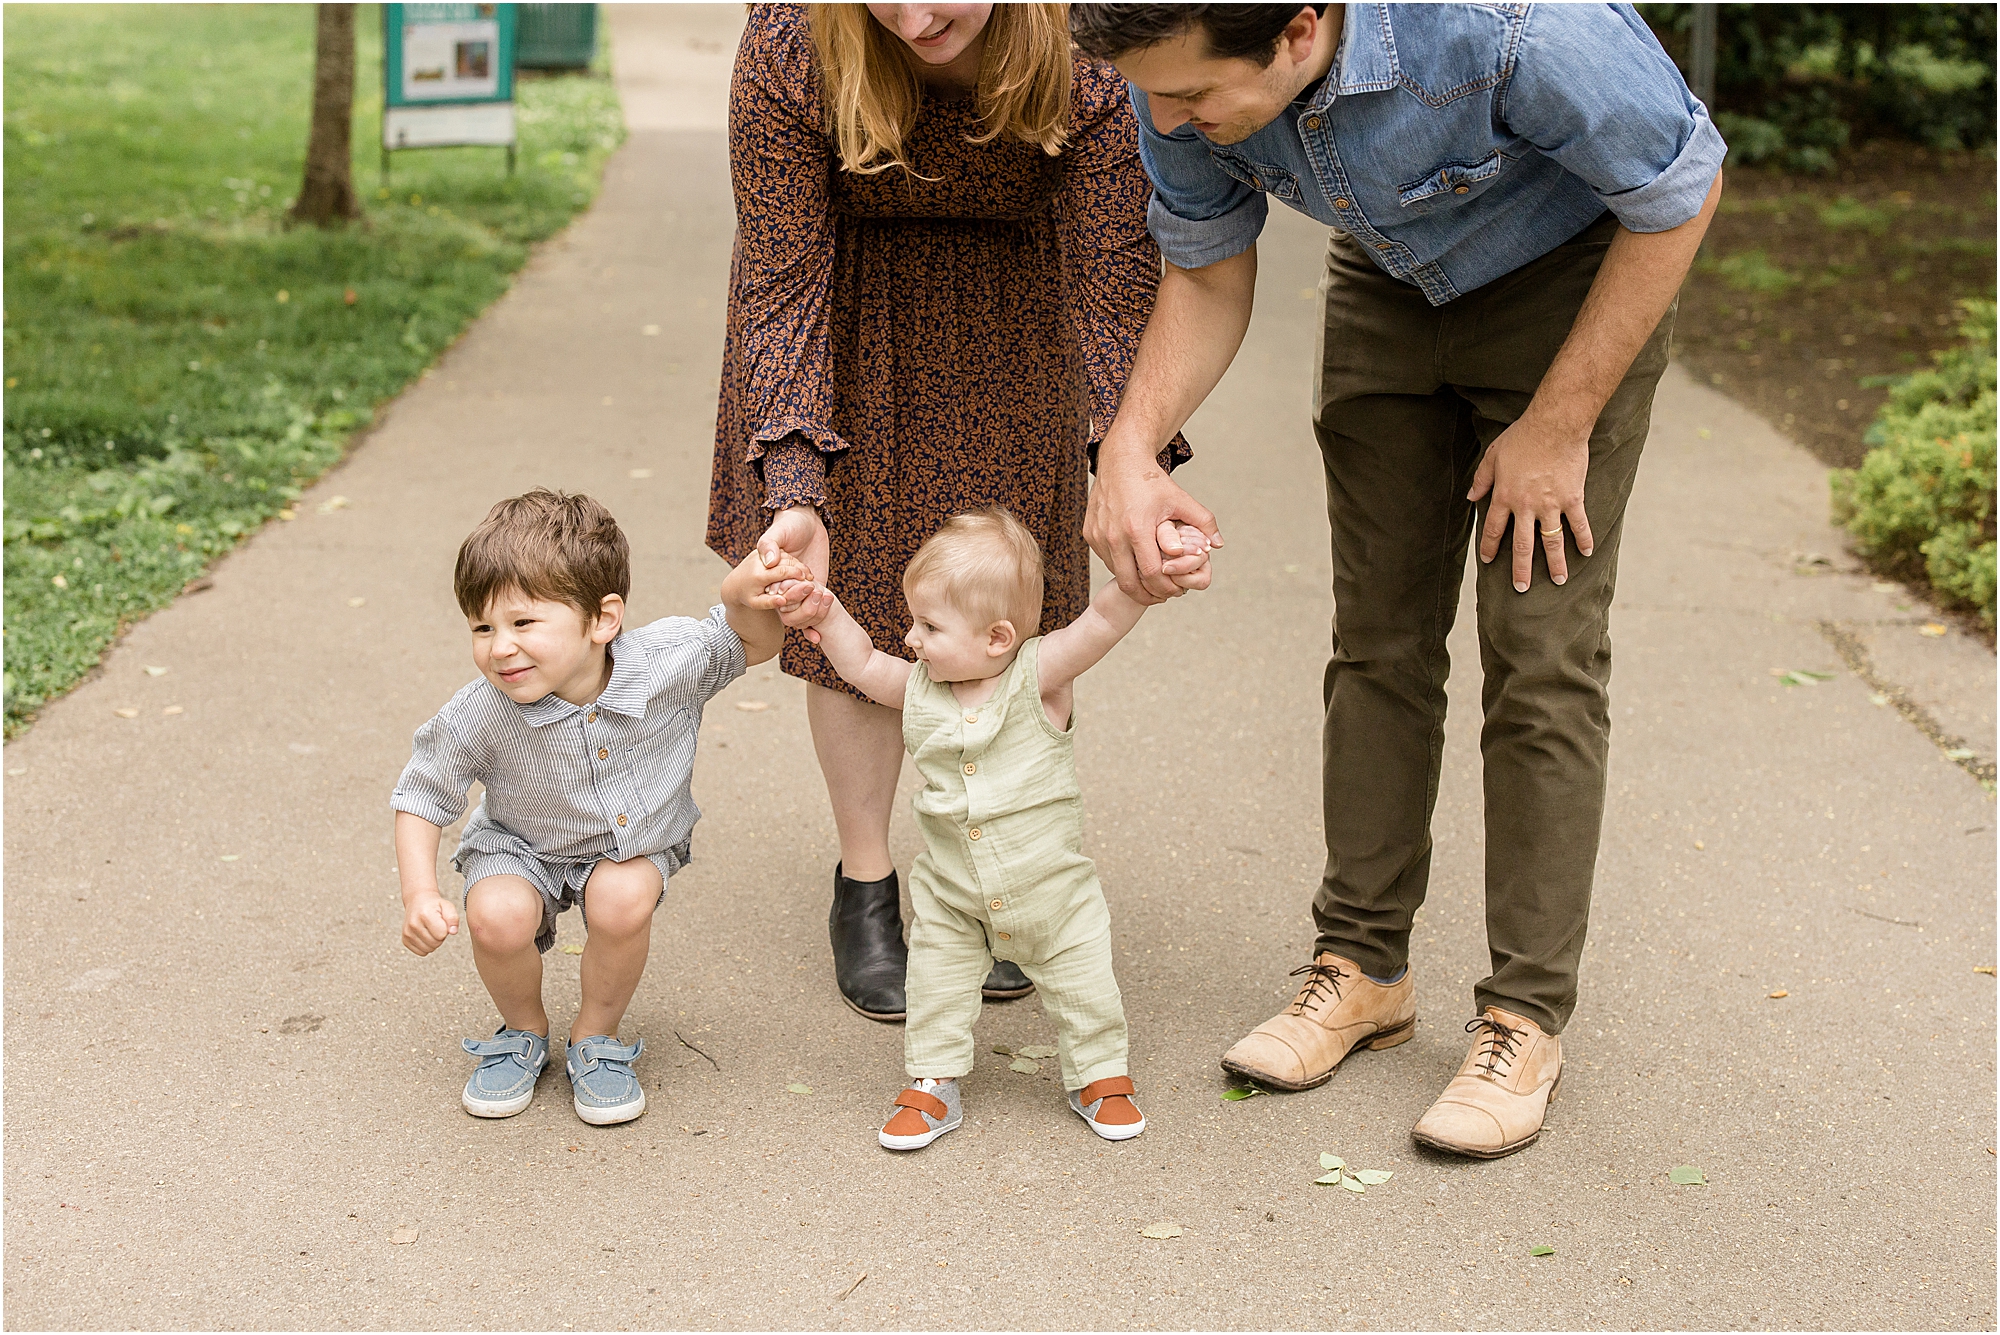 Family of 4 standing on sidewalk holding hands. Mom is wearing a long sleeve black and orange dress. Dad is wearing a long sleeve blue jean shirt with the sleeves rolled and olive green pants. The boys are wearing a light blue short sleeve shirt and shorts and blue velcro shoes and the other is wearing a light green sleeveless long romper with orange shoes